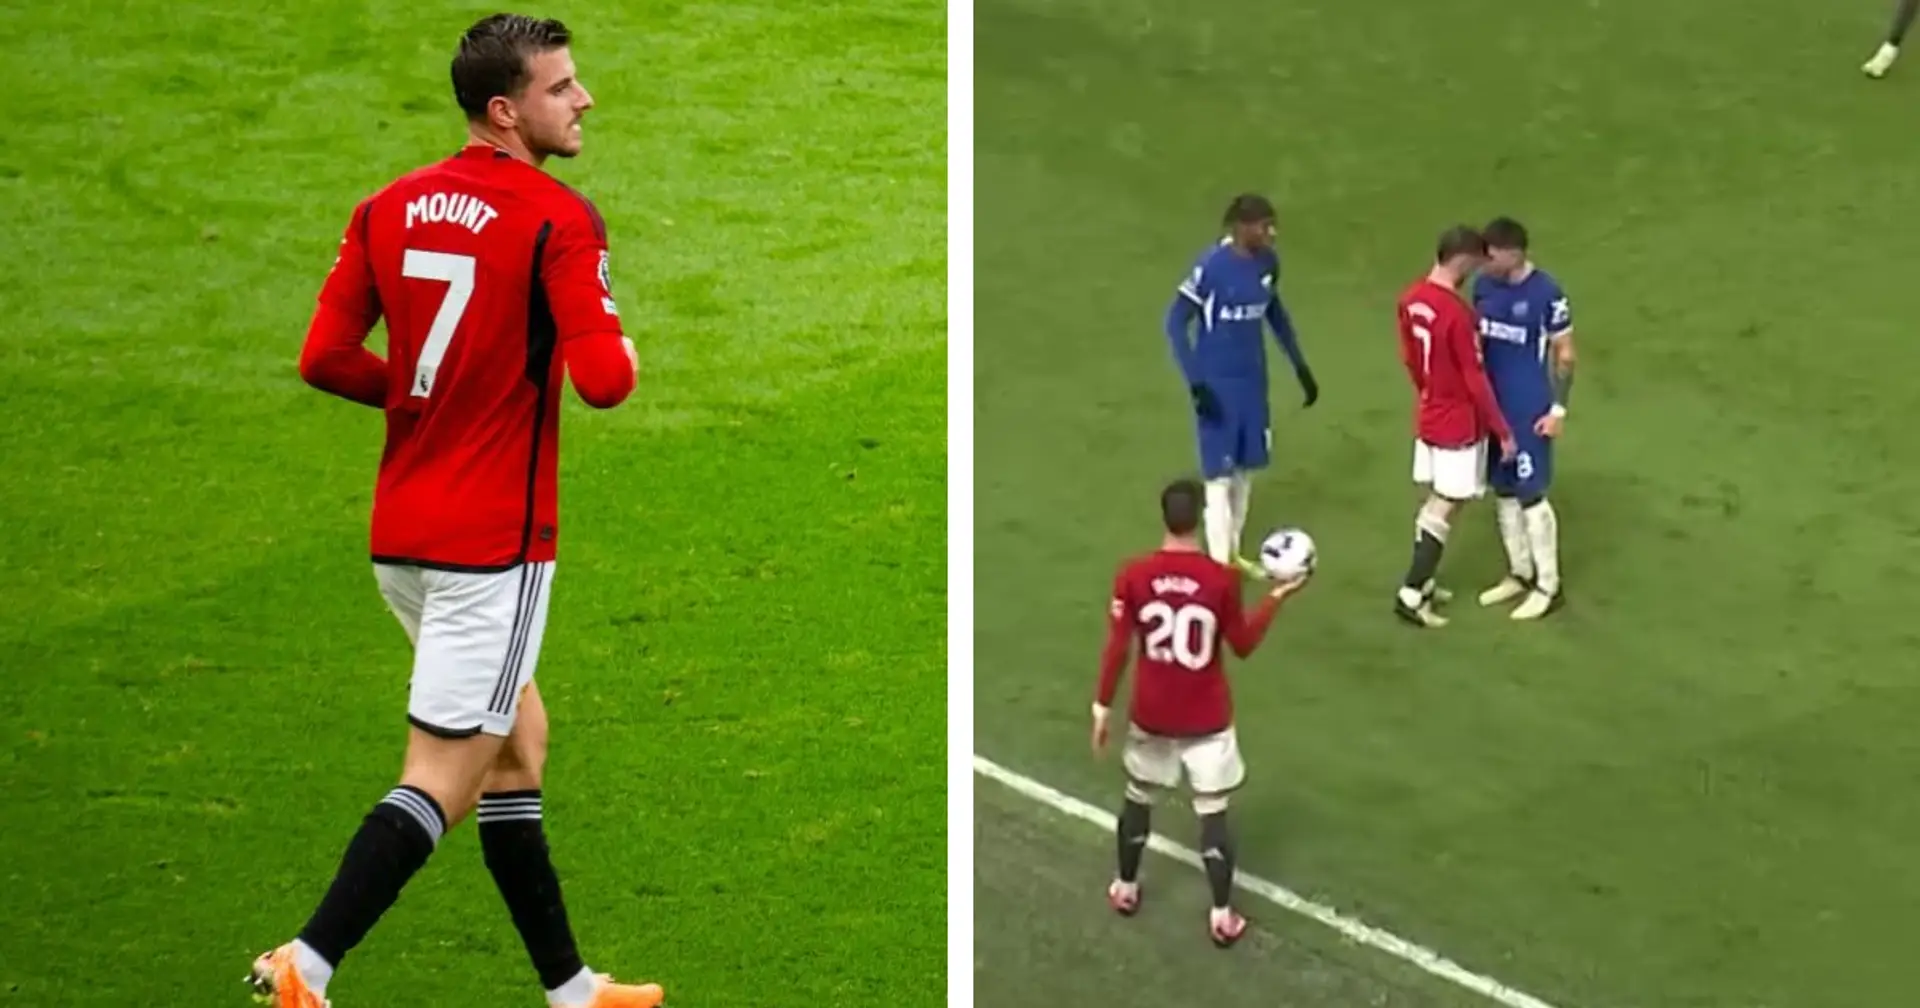 Spotted: Mason Mount squares up to Enzo minutes before Chelsea go on to score stoppage-time winner